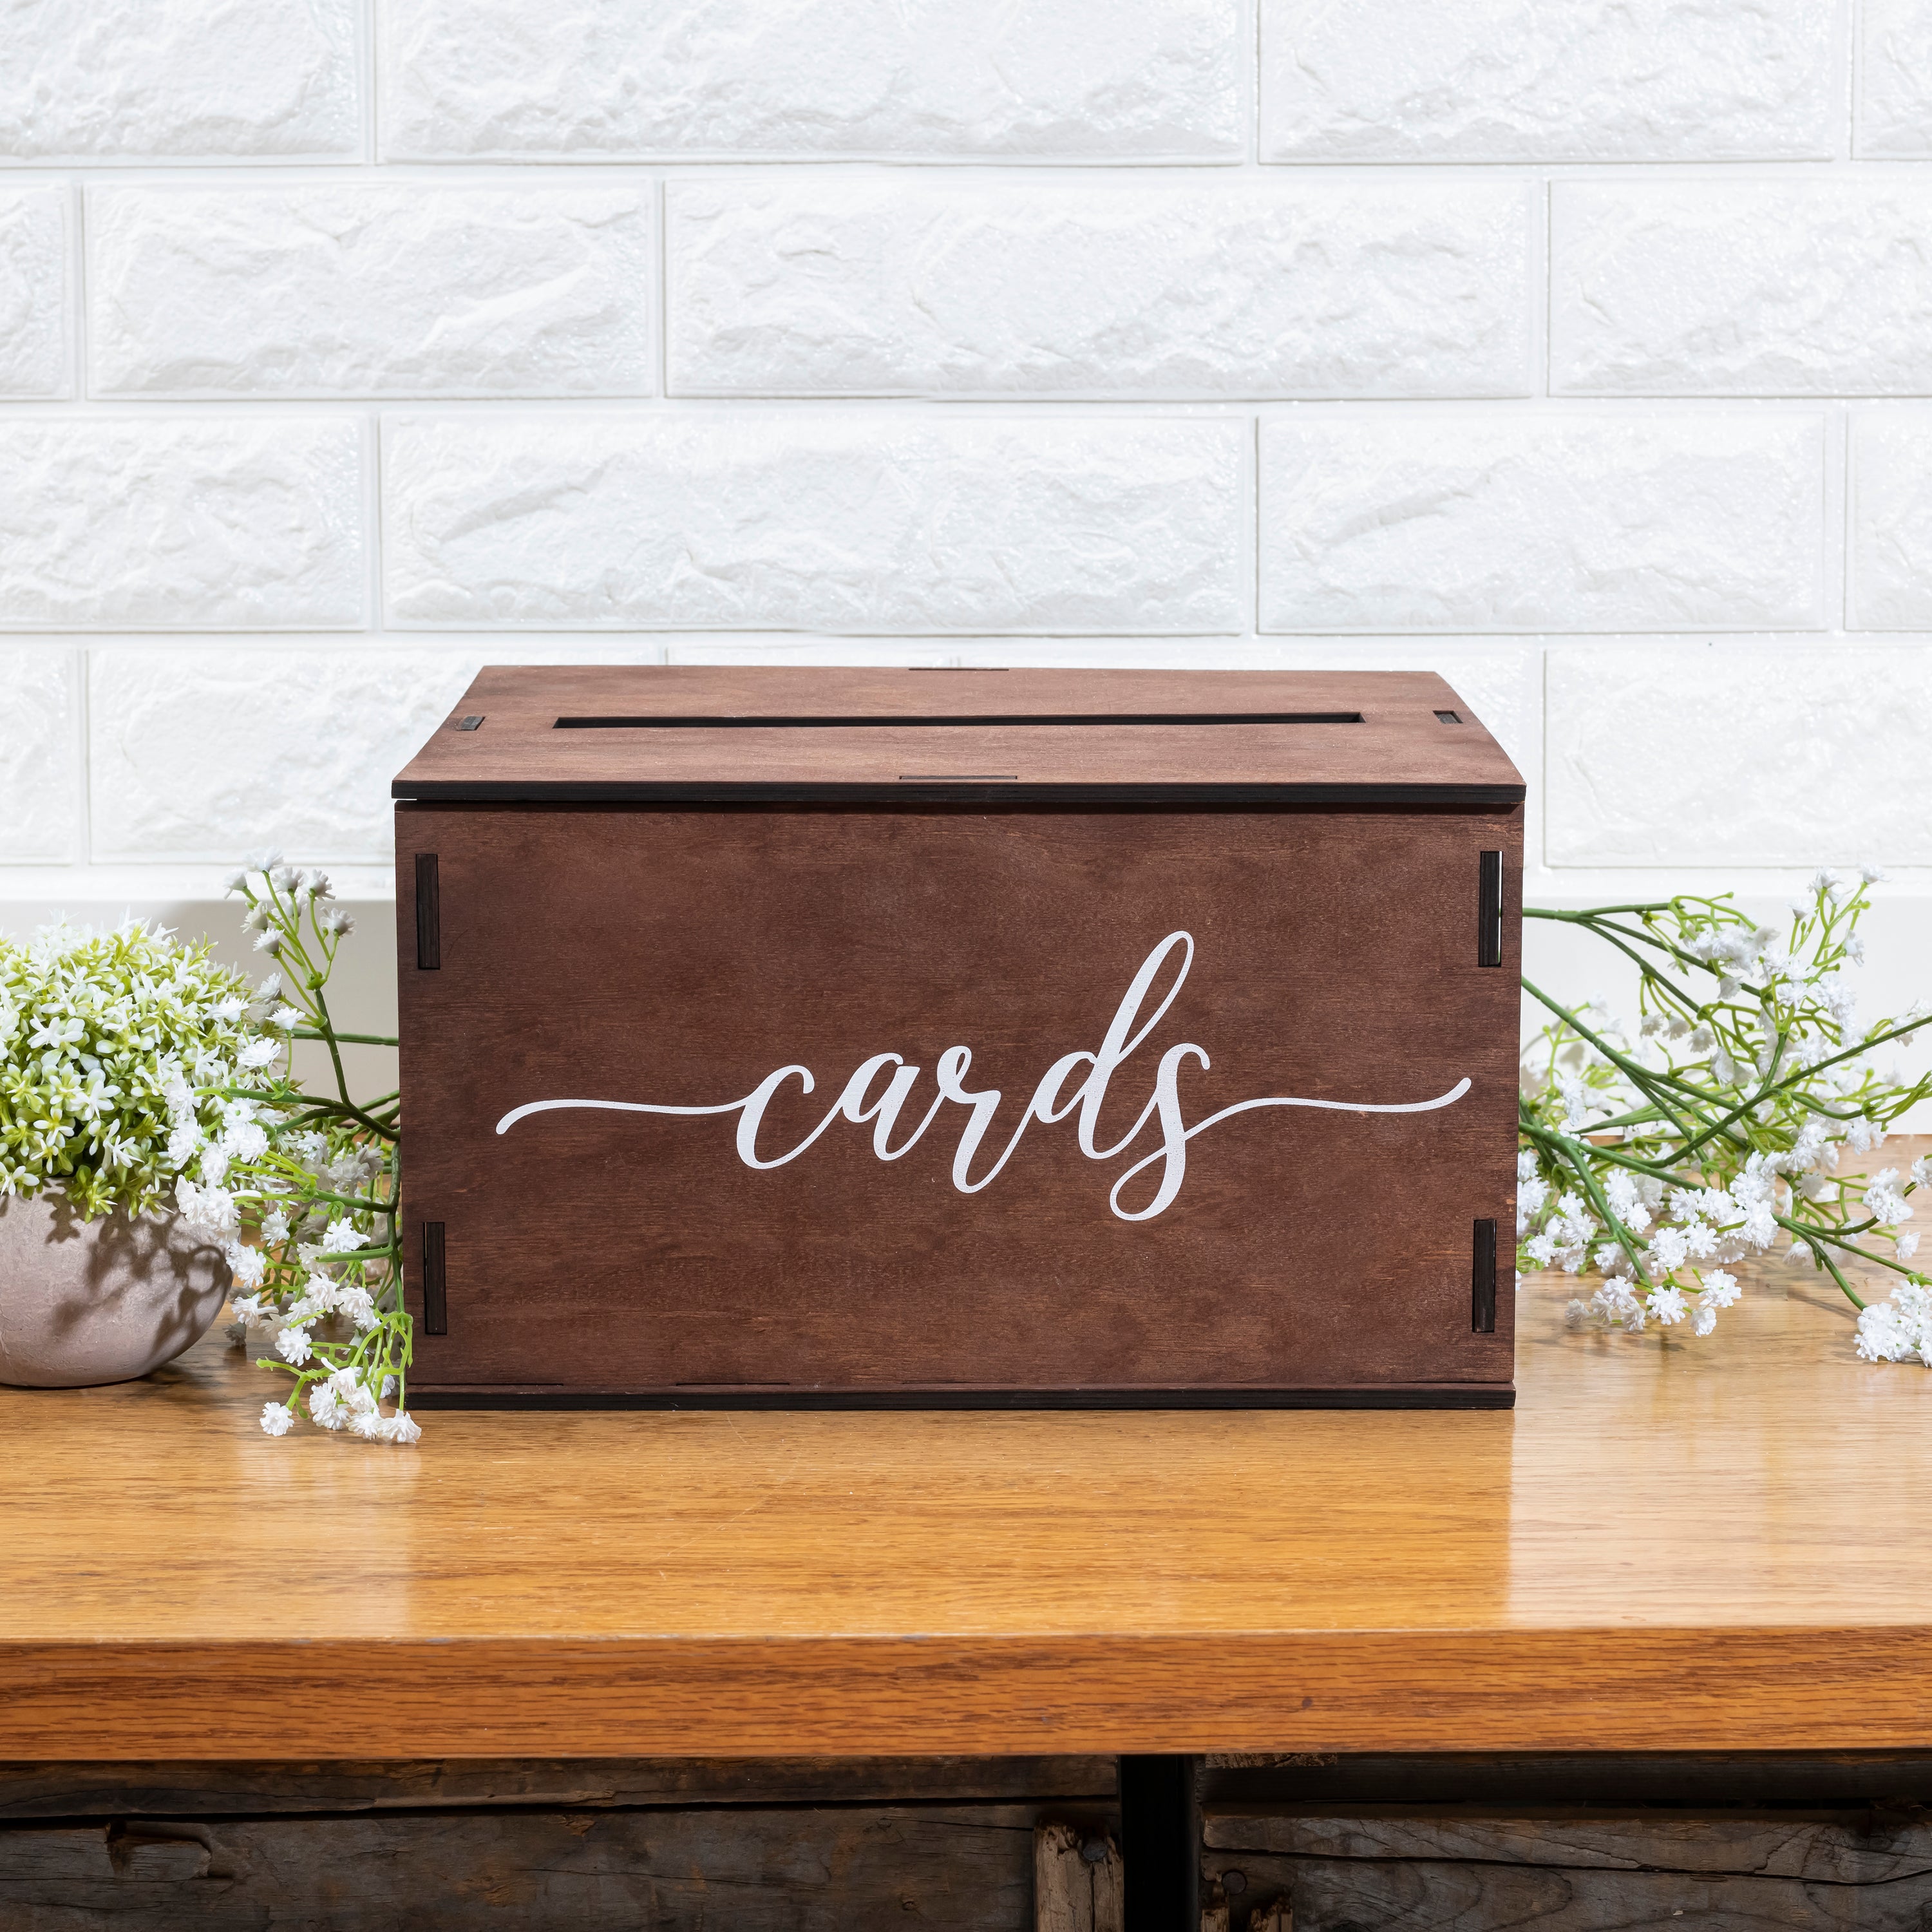 Wooden Wedding Card Box with Slot | Wedding Decorations for Reception, Card Box for Wedding Gifts & Money | Rustic Card Box with Lid | Baby Shower, Bridal Shower, Graduation Card Box - Standard Size